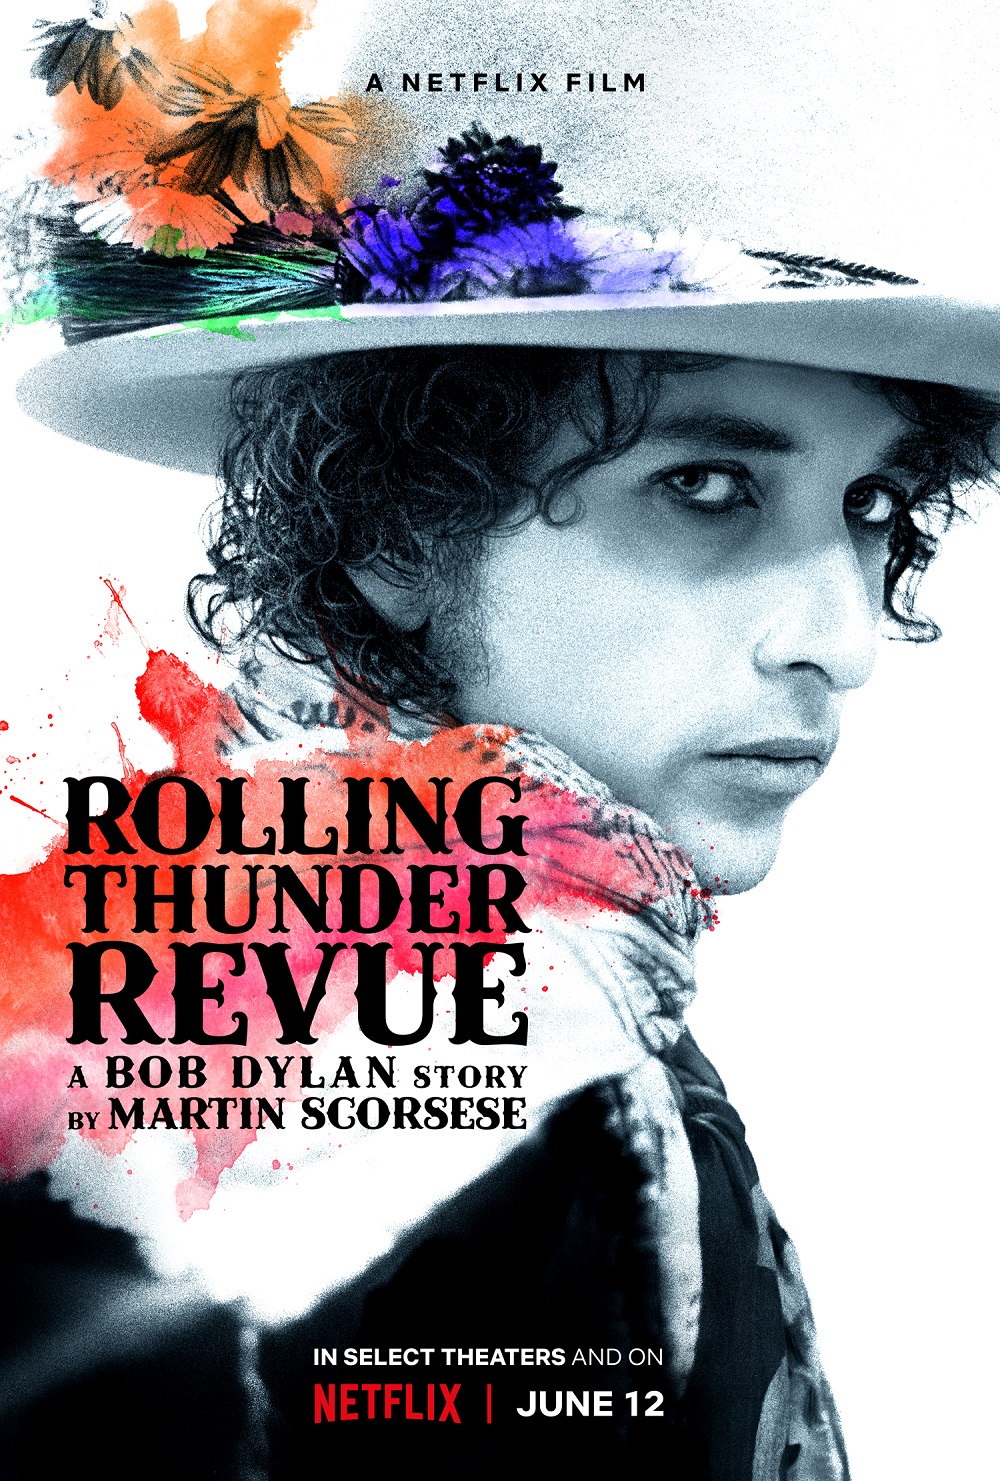 Rolling Thunder Revue: A Bob Dylan Story by Martin Scorsese (2019), on Netflix